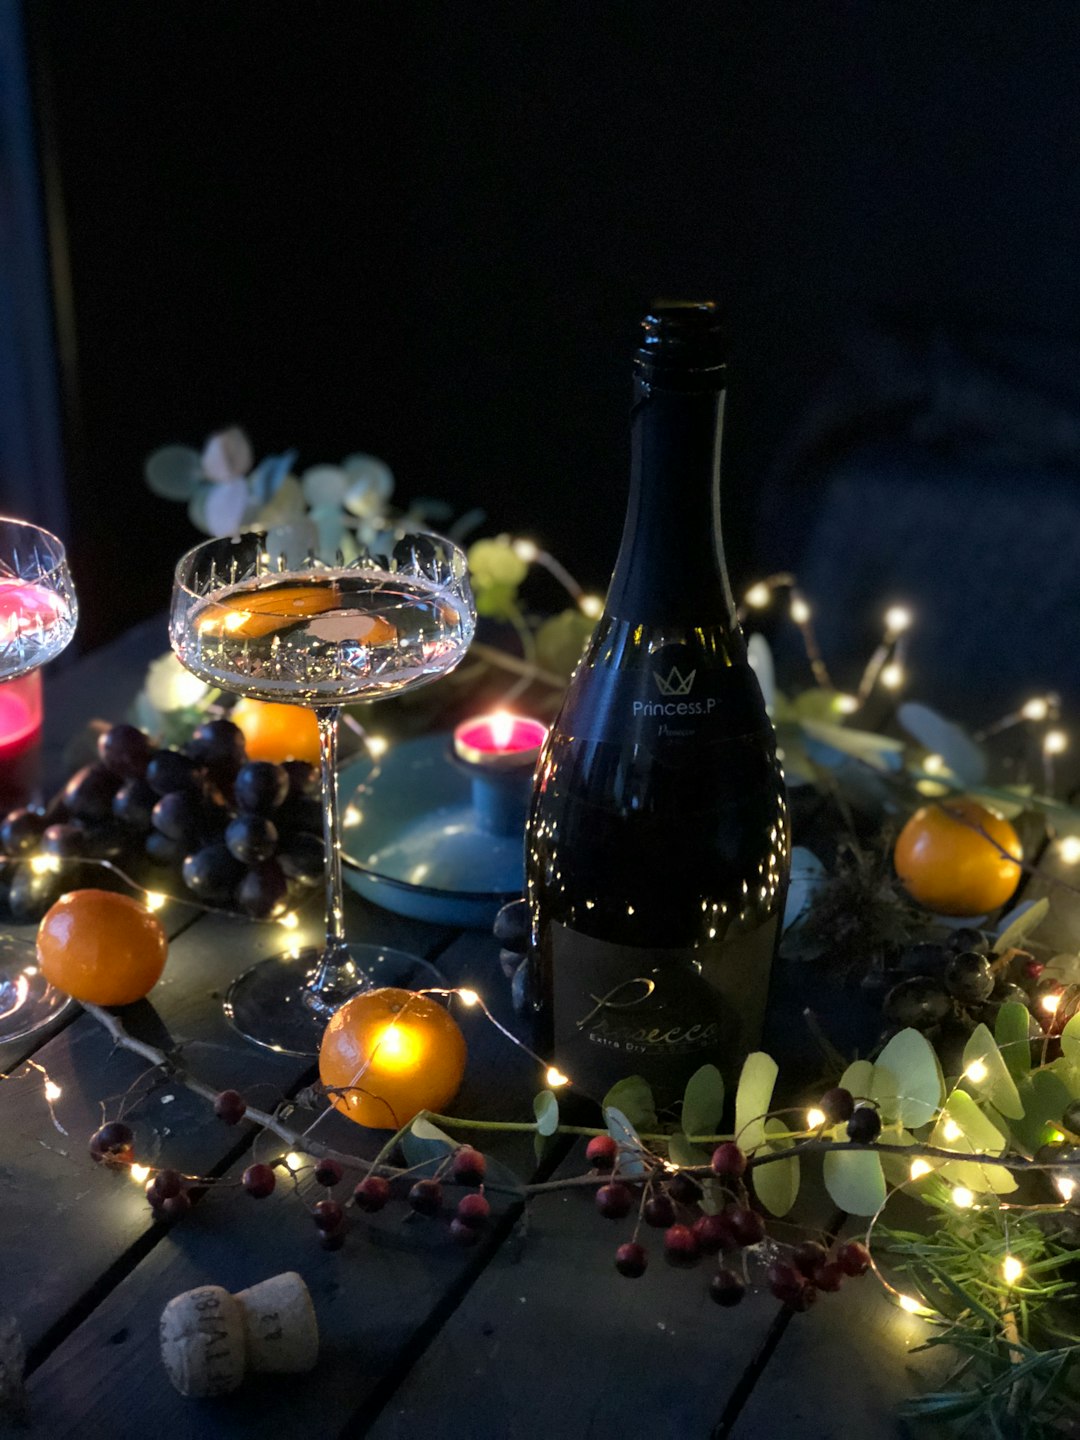 A bottle of Prosecco and a coupe on a sparkling decorated Christmas table 